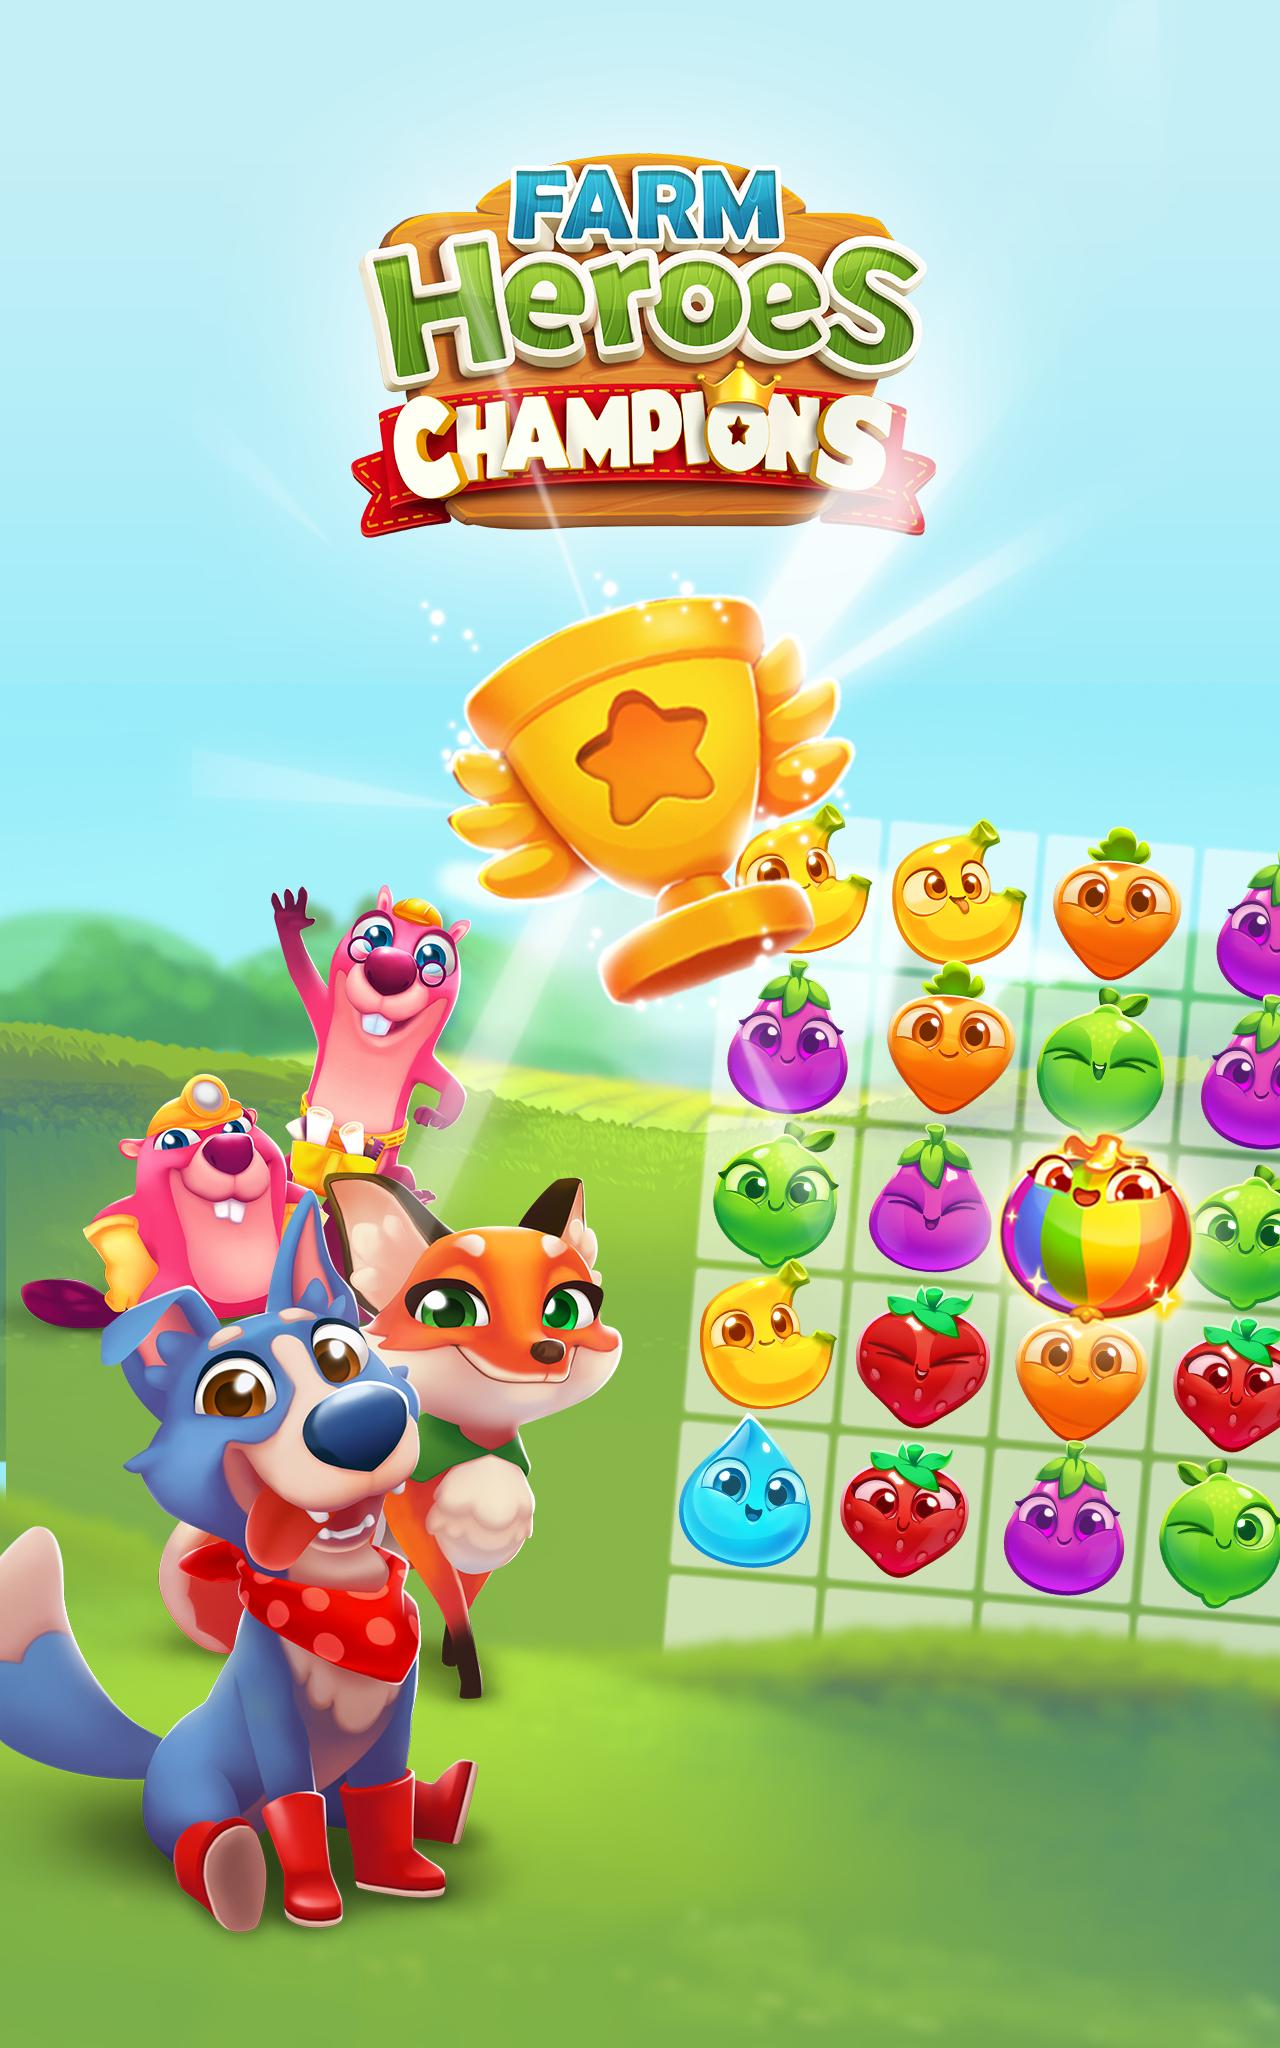 Farm Heroes Champions for Android - APK Download